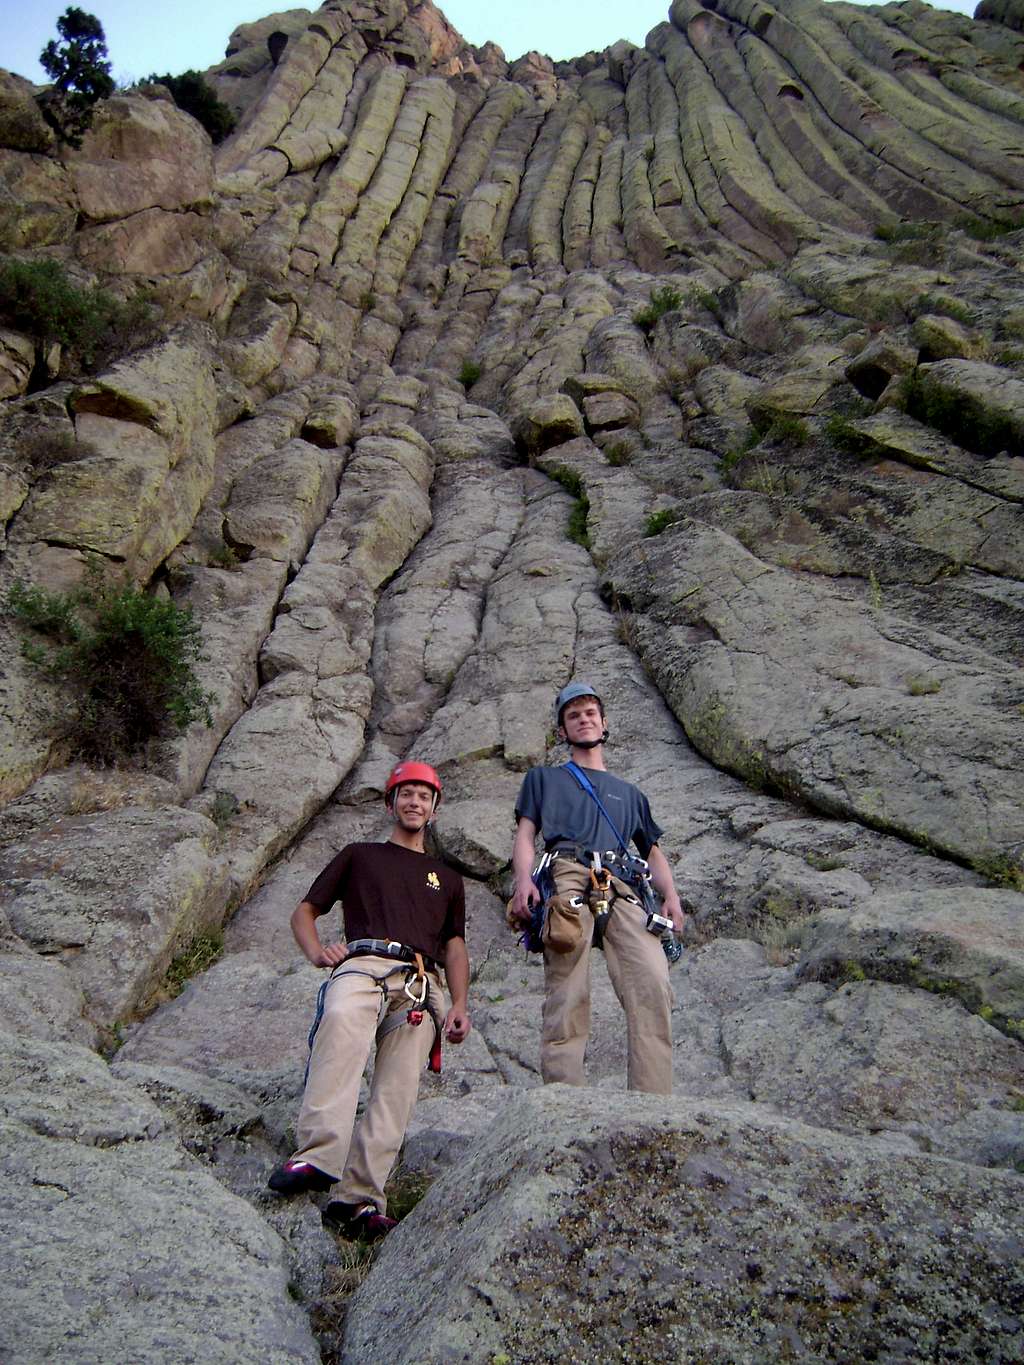 Myself and JD Sacklin at the base of the Durrance route.